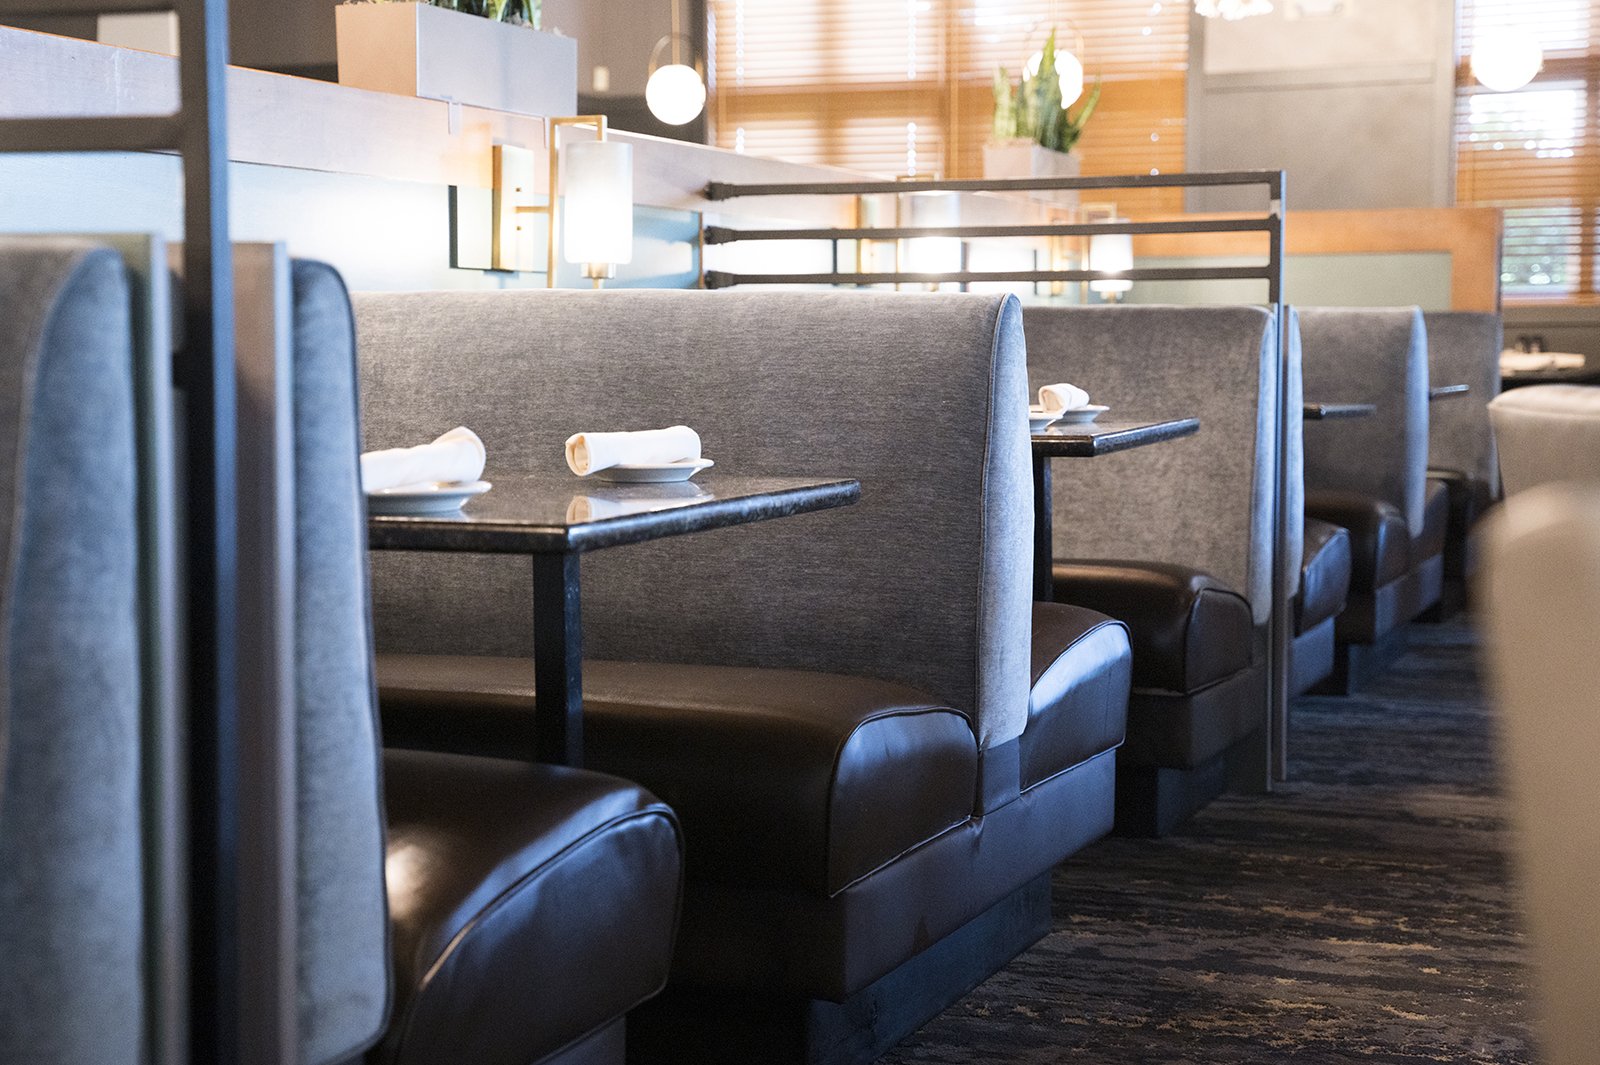 Restaurant Furniture - Custom Booth Seating, Reupholstery and More